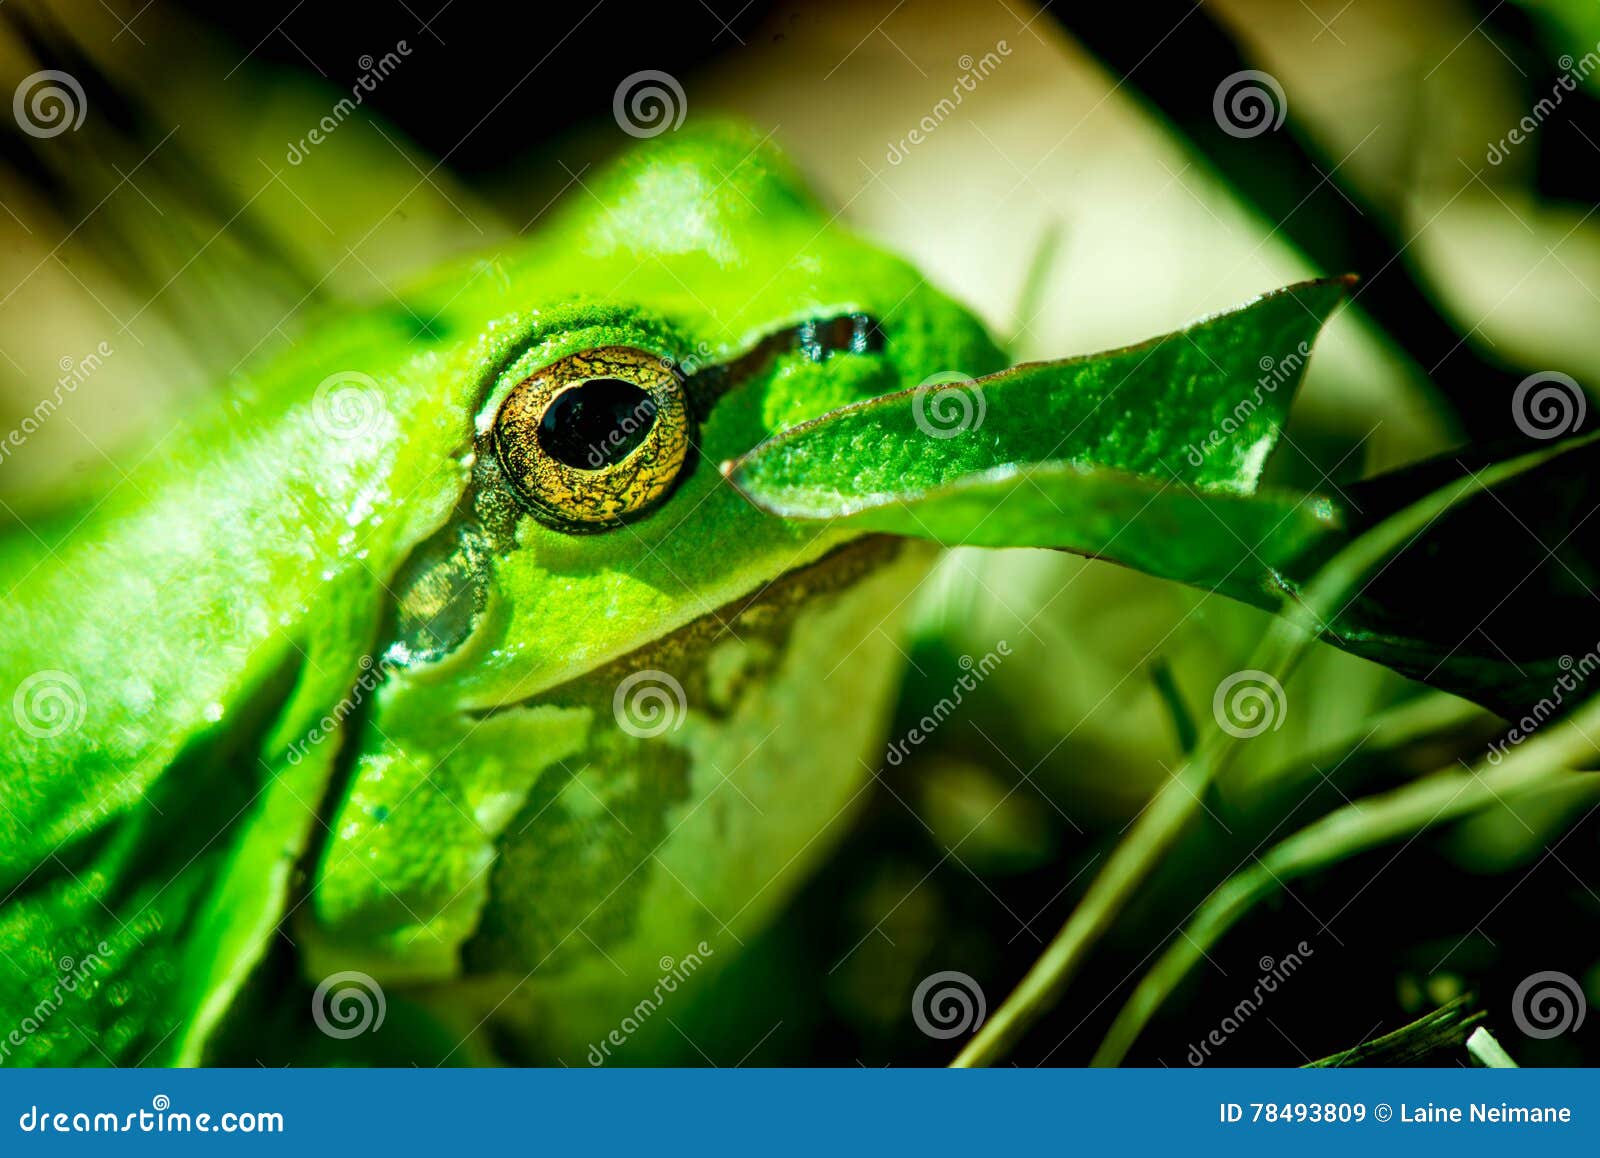 Premium Photo  Little green frog hiding in the grass